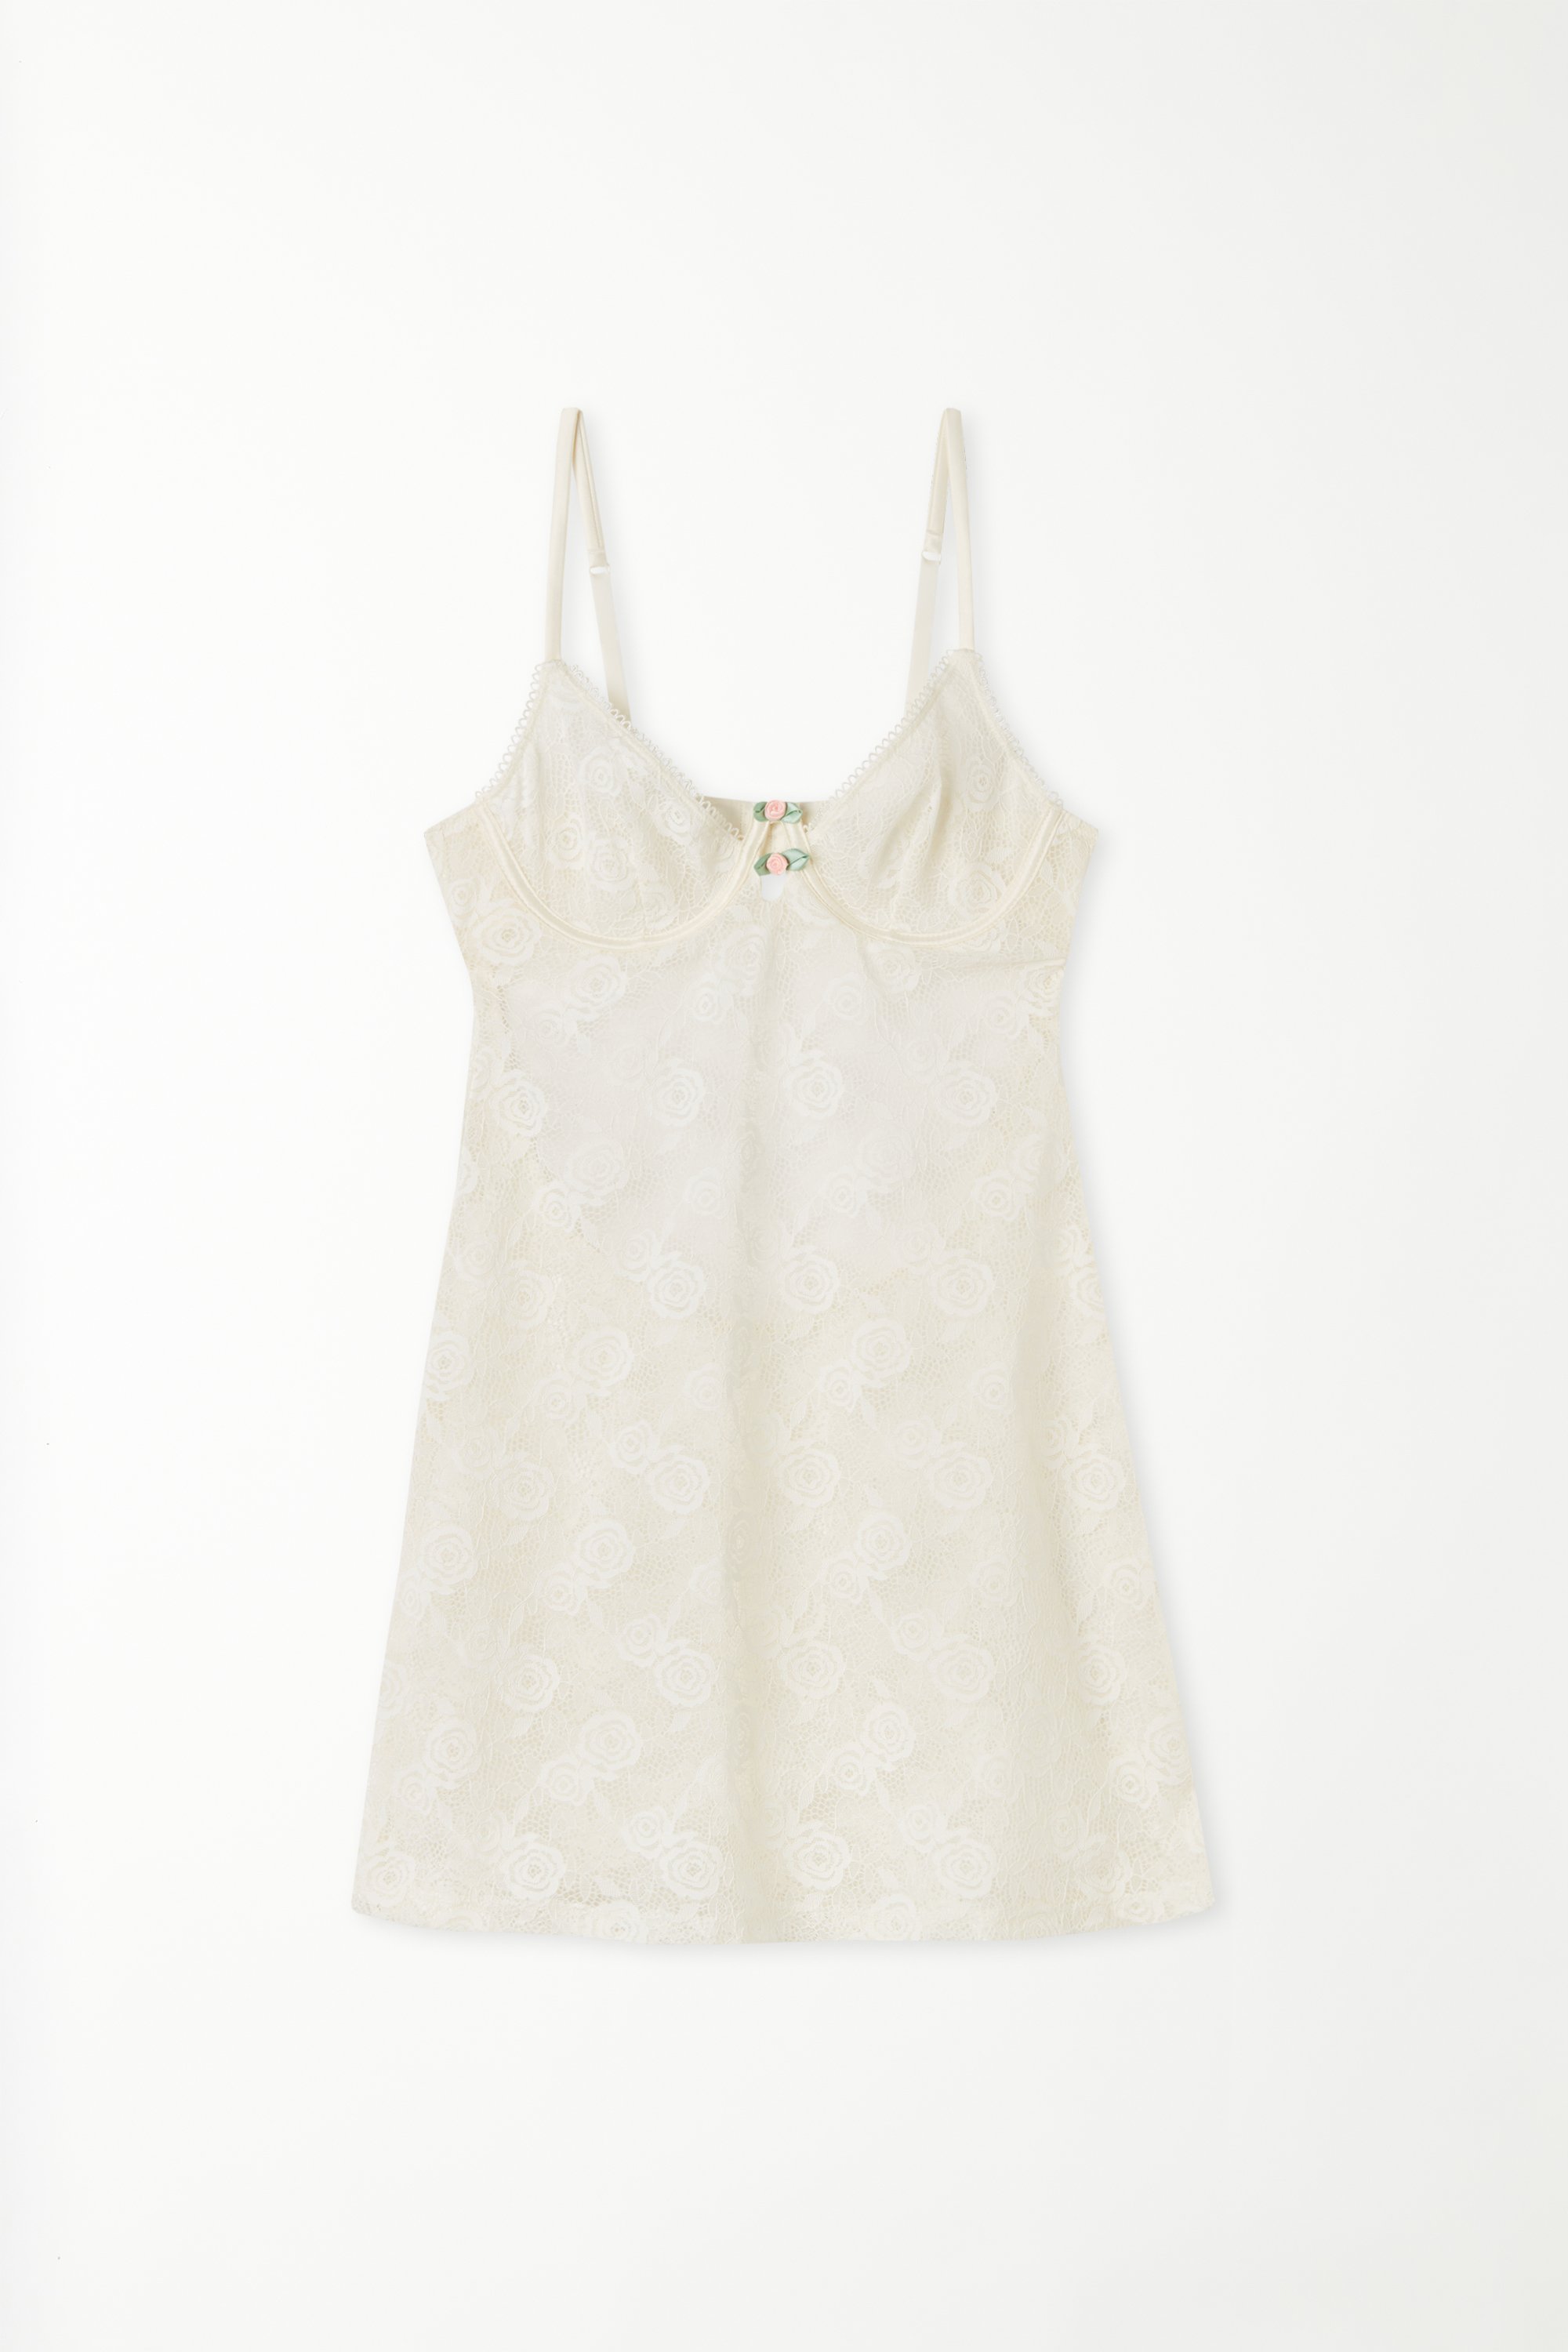 Milk Roses Lace Chemise with Balconette Cups